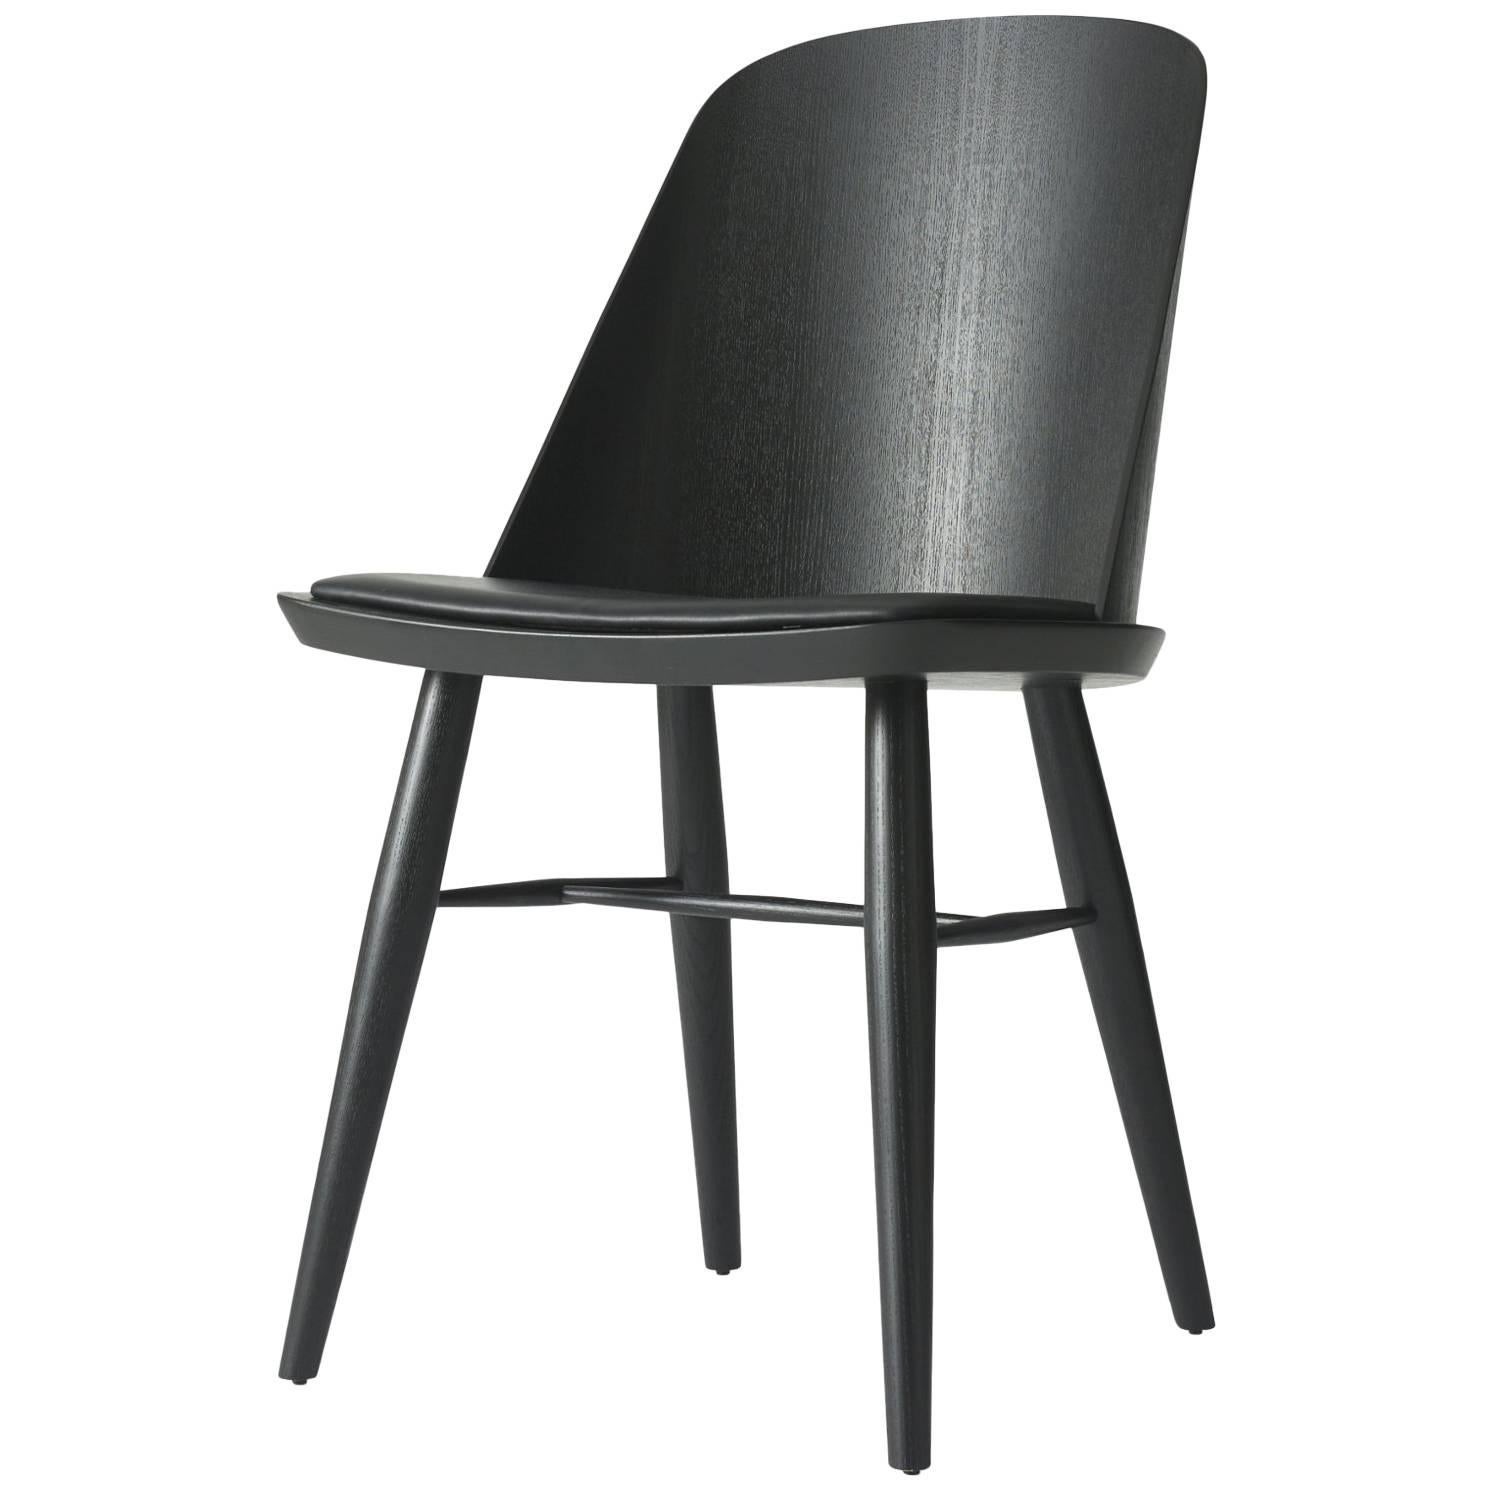 Synnes Dining Chair by Falke Svatun, Black Ash / Black Leather